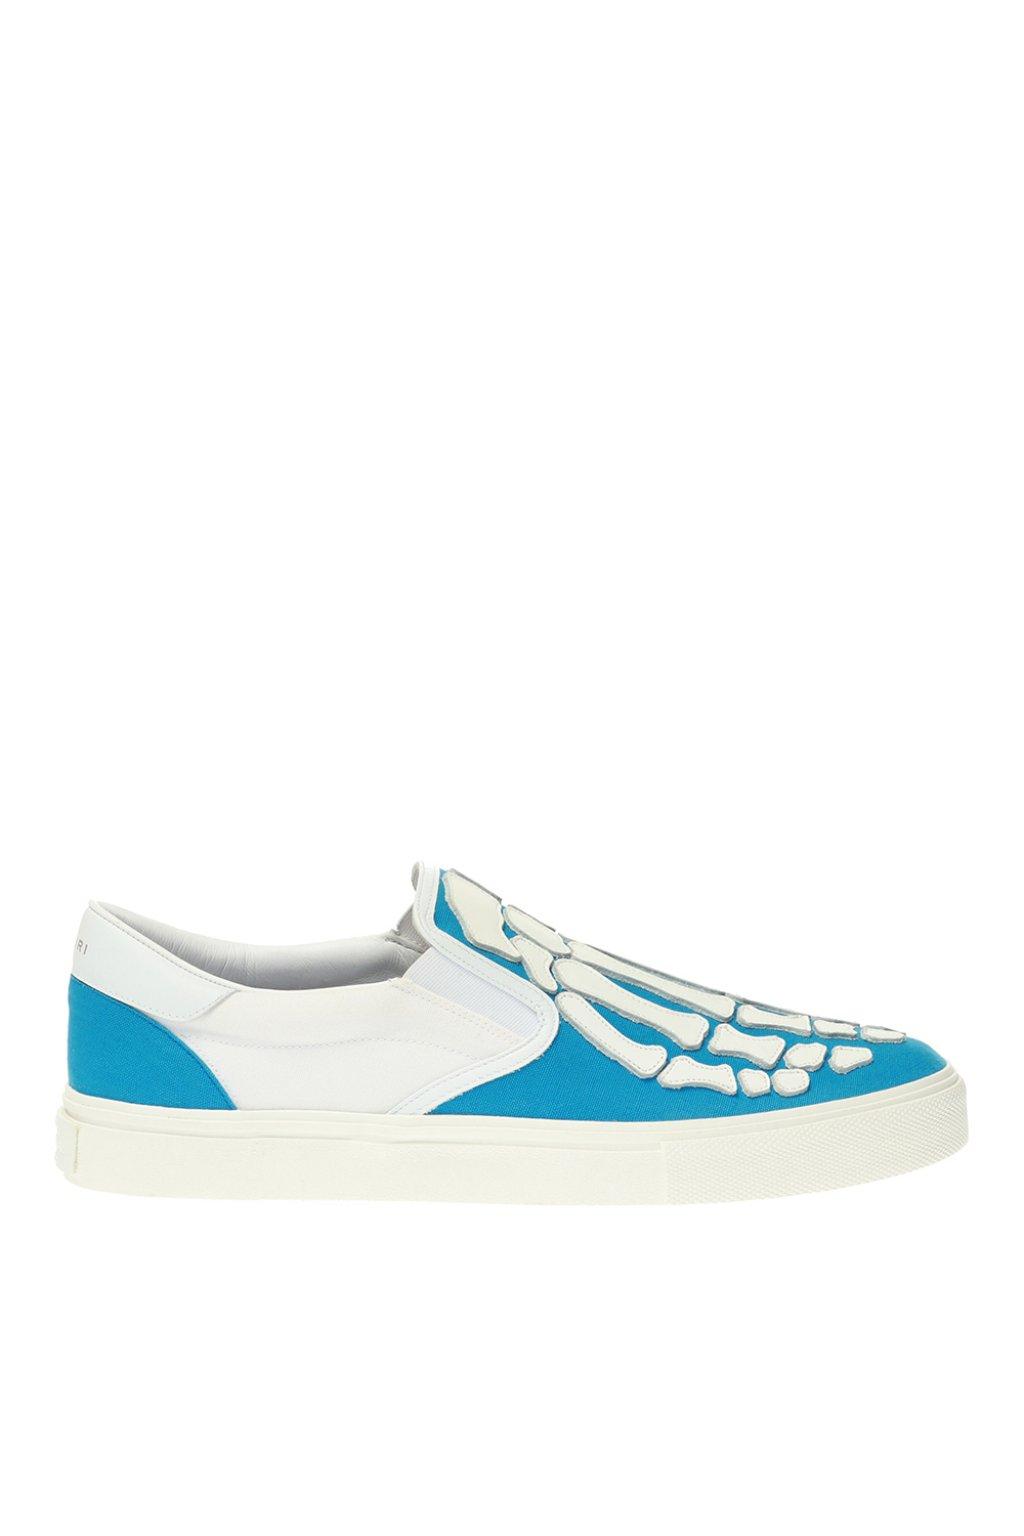 Amiri Leather Slip-on Shoes in Blue for Men - Lyst